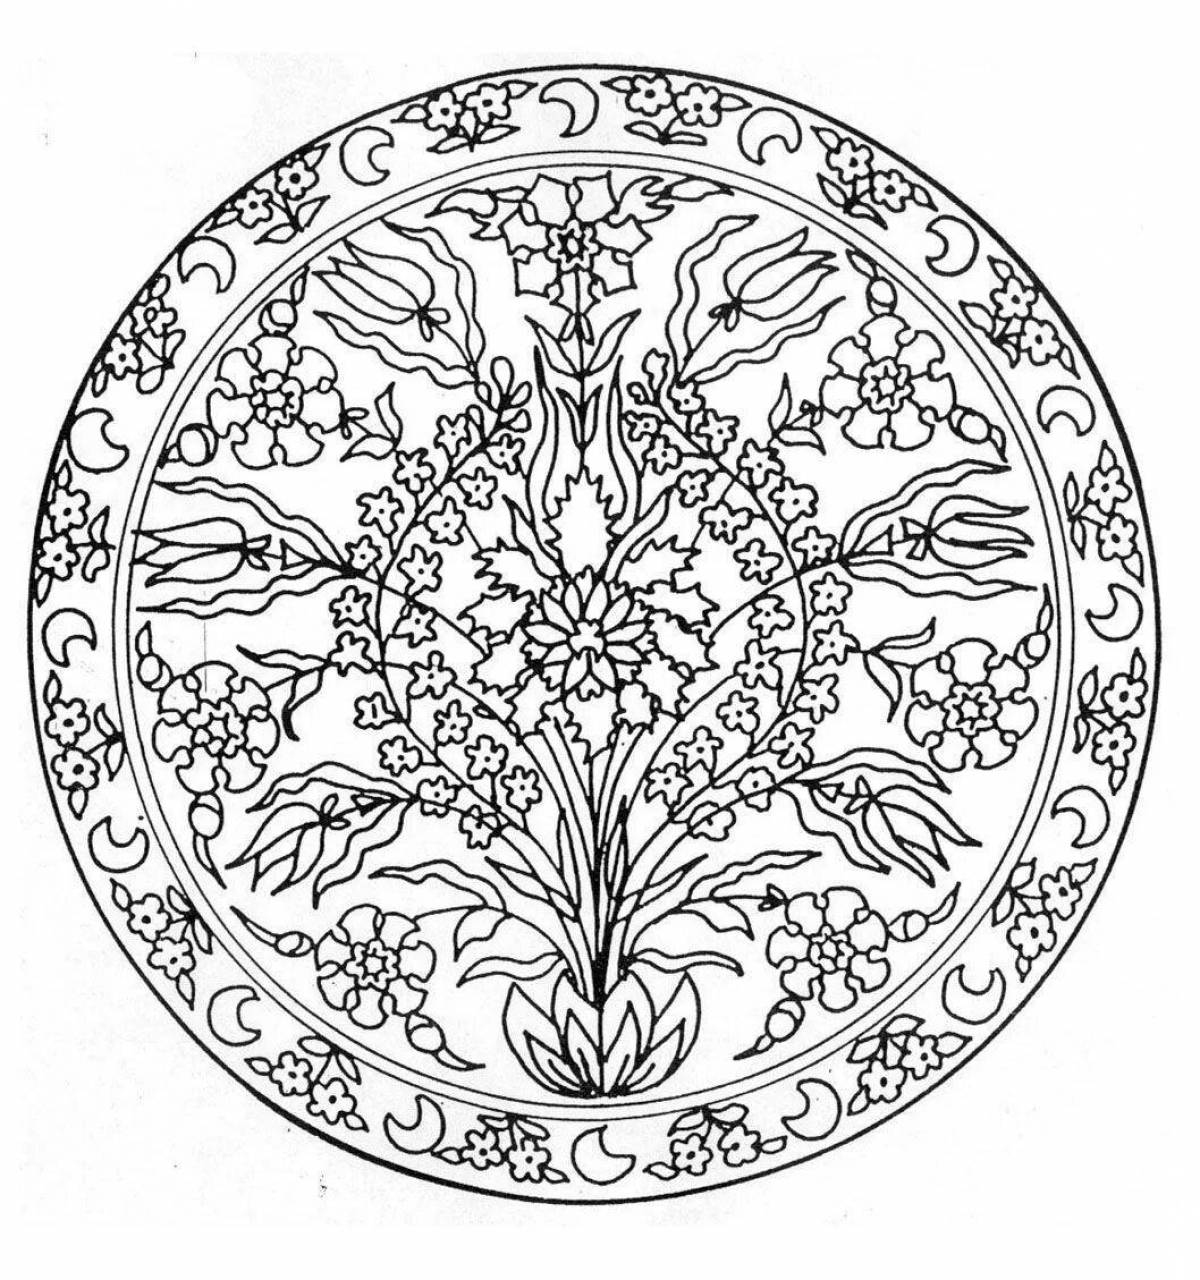 Coloring page with colorful plate